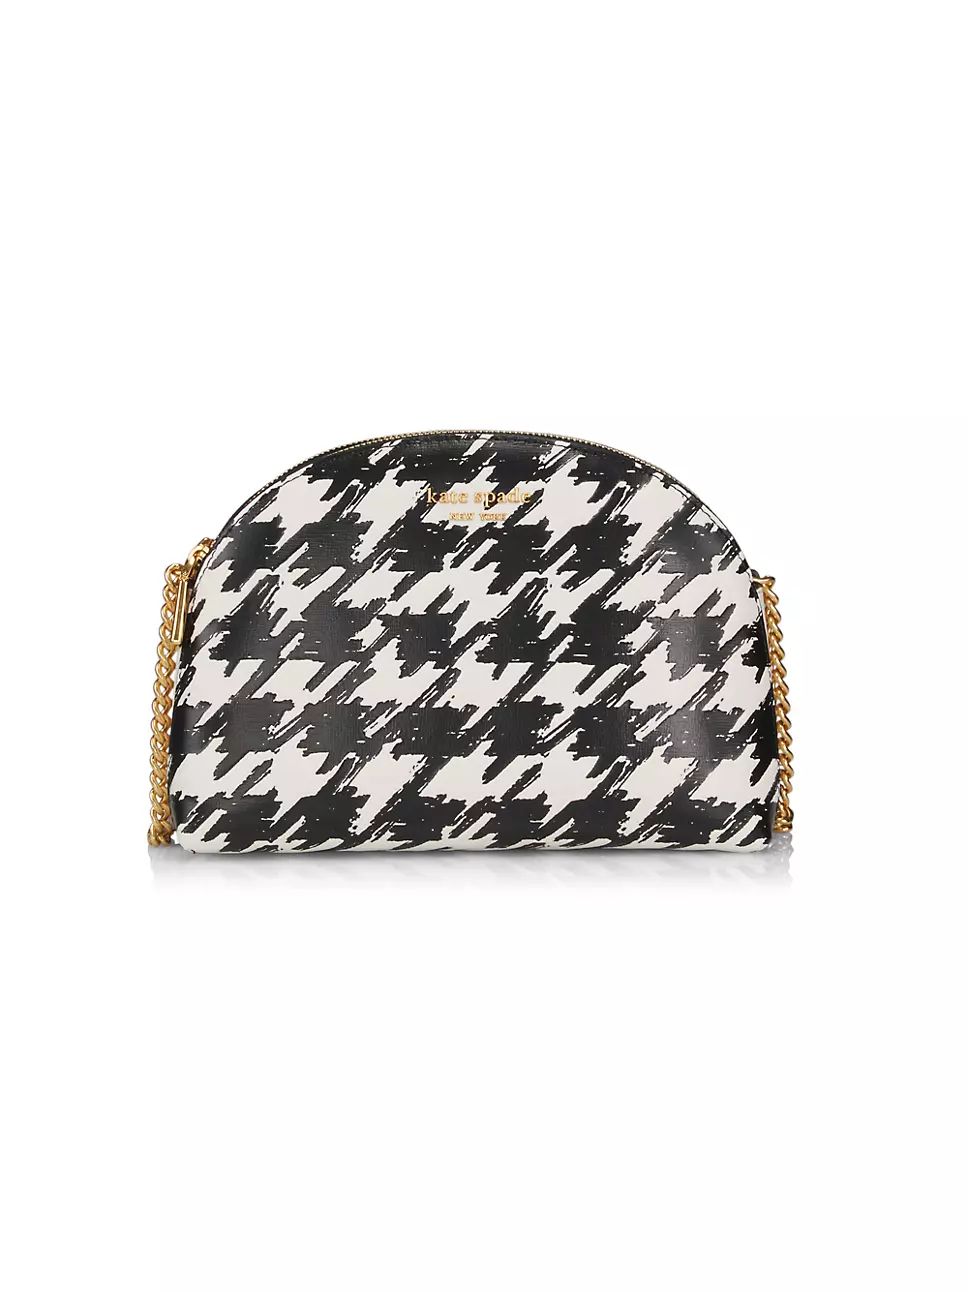 Morgan Painterly Houndstooth Leather Crossbody Bag | Saks Fifth Avenue